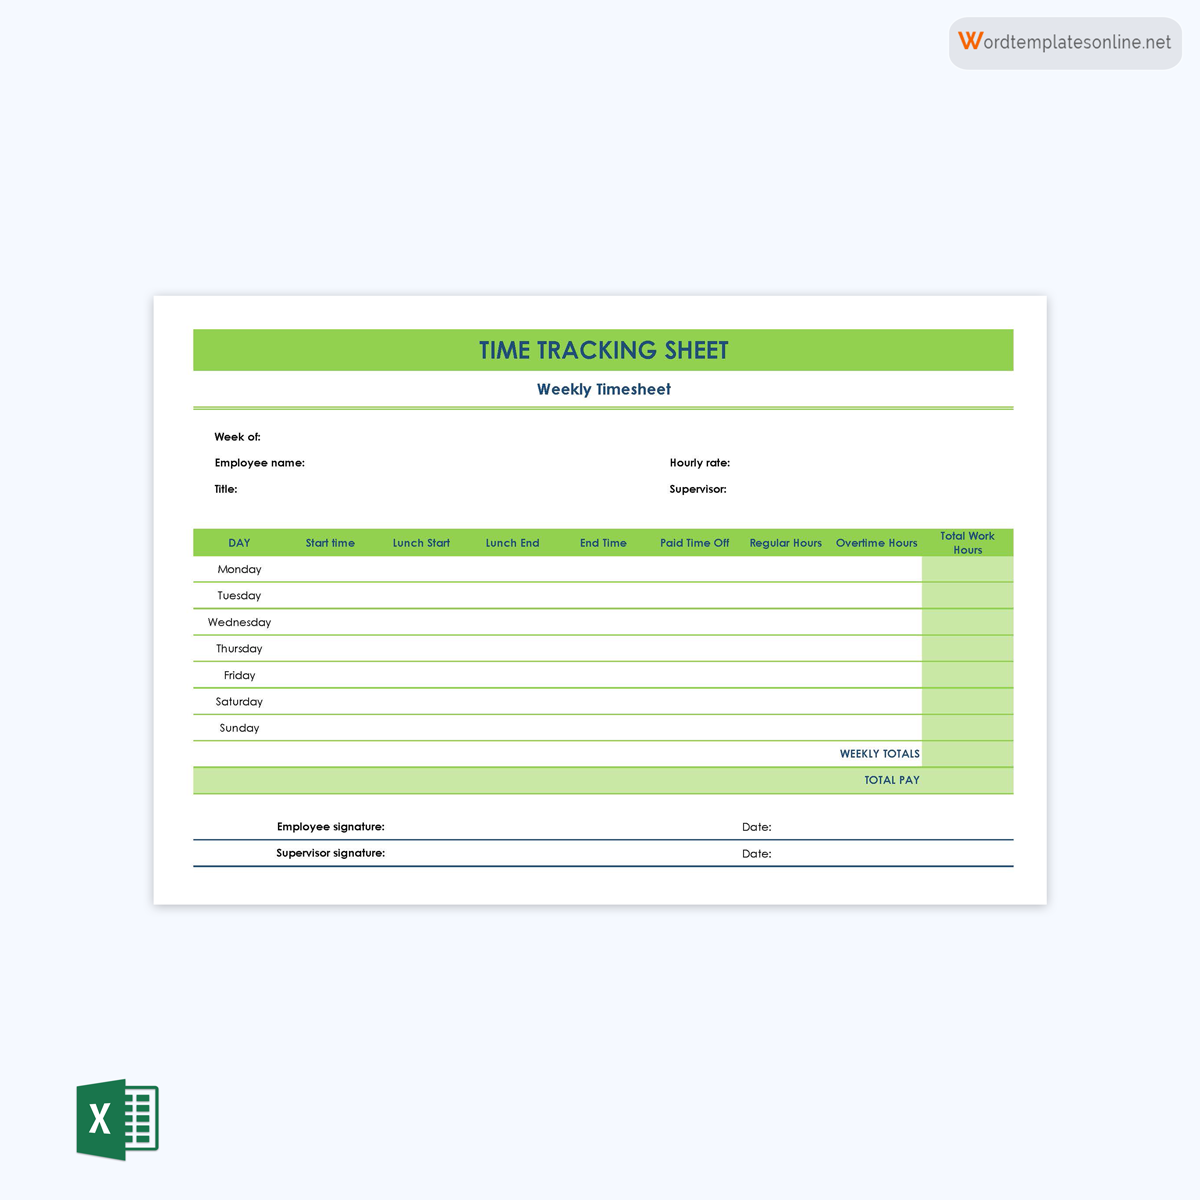 Free Customizable Time Tracking Spreadsheet Template 08 as Excel Sheet